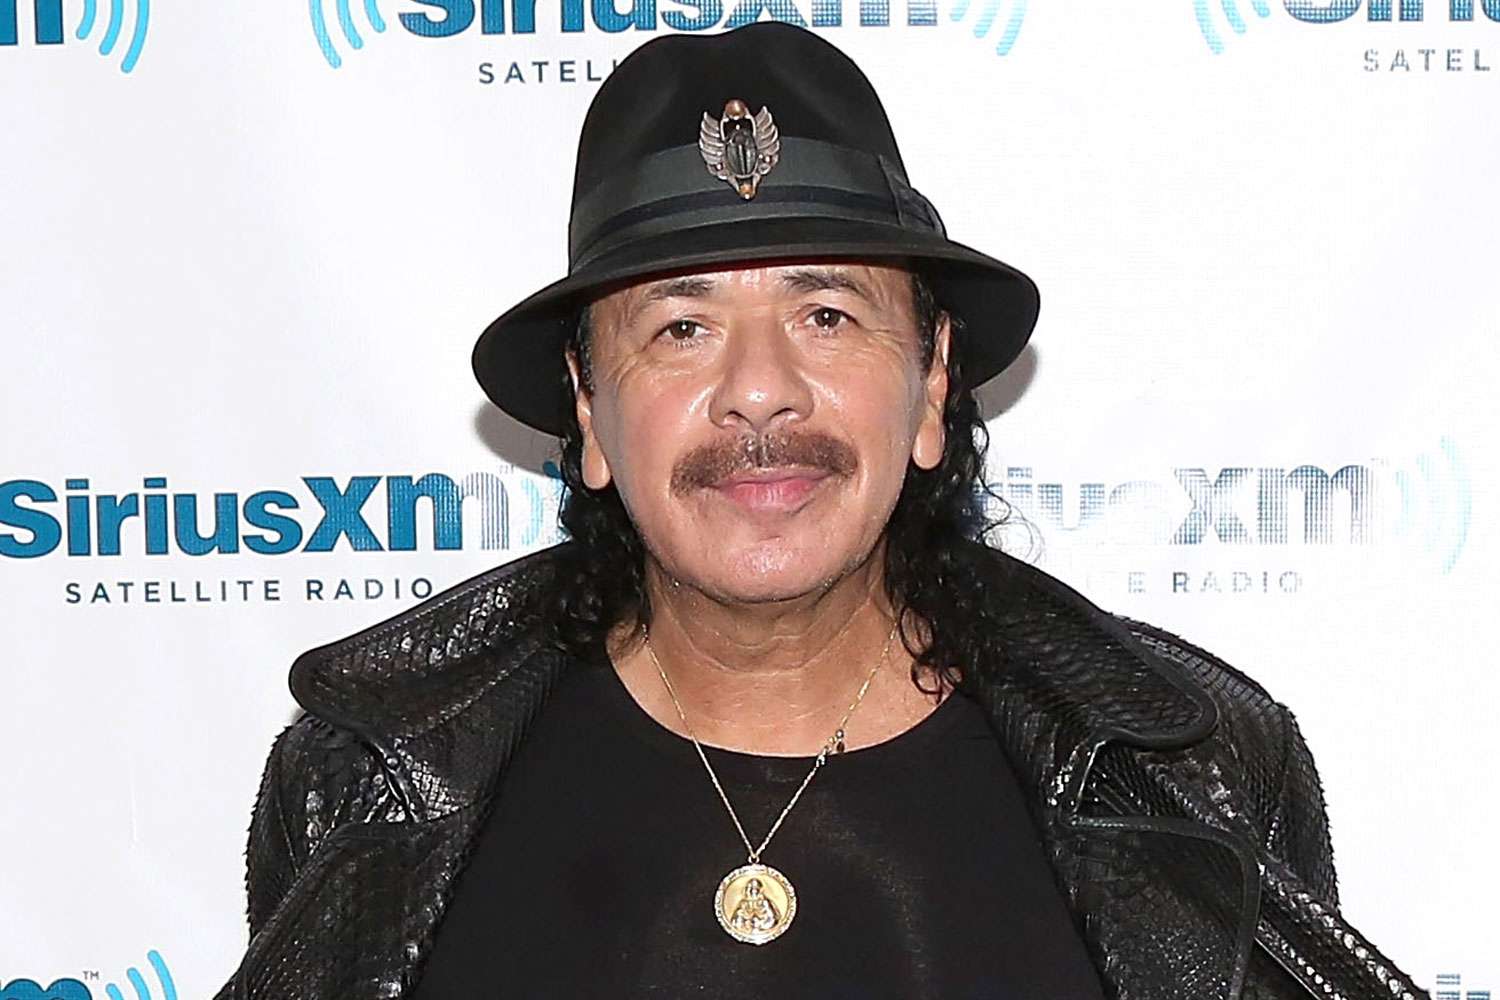 WASHINGTON, DC - OCTOBER 14: Legendary musician Carlos Santana visits the SiriusXM studios for "SiriusXM ICONOS with Carlos Santana" on October 14, 2014 in Washington, DC. (Photo by Taylor Hill/Getty Images for SiriusXM)